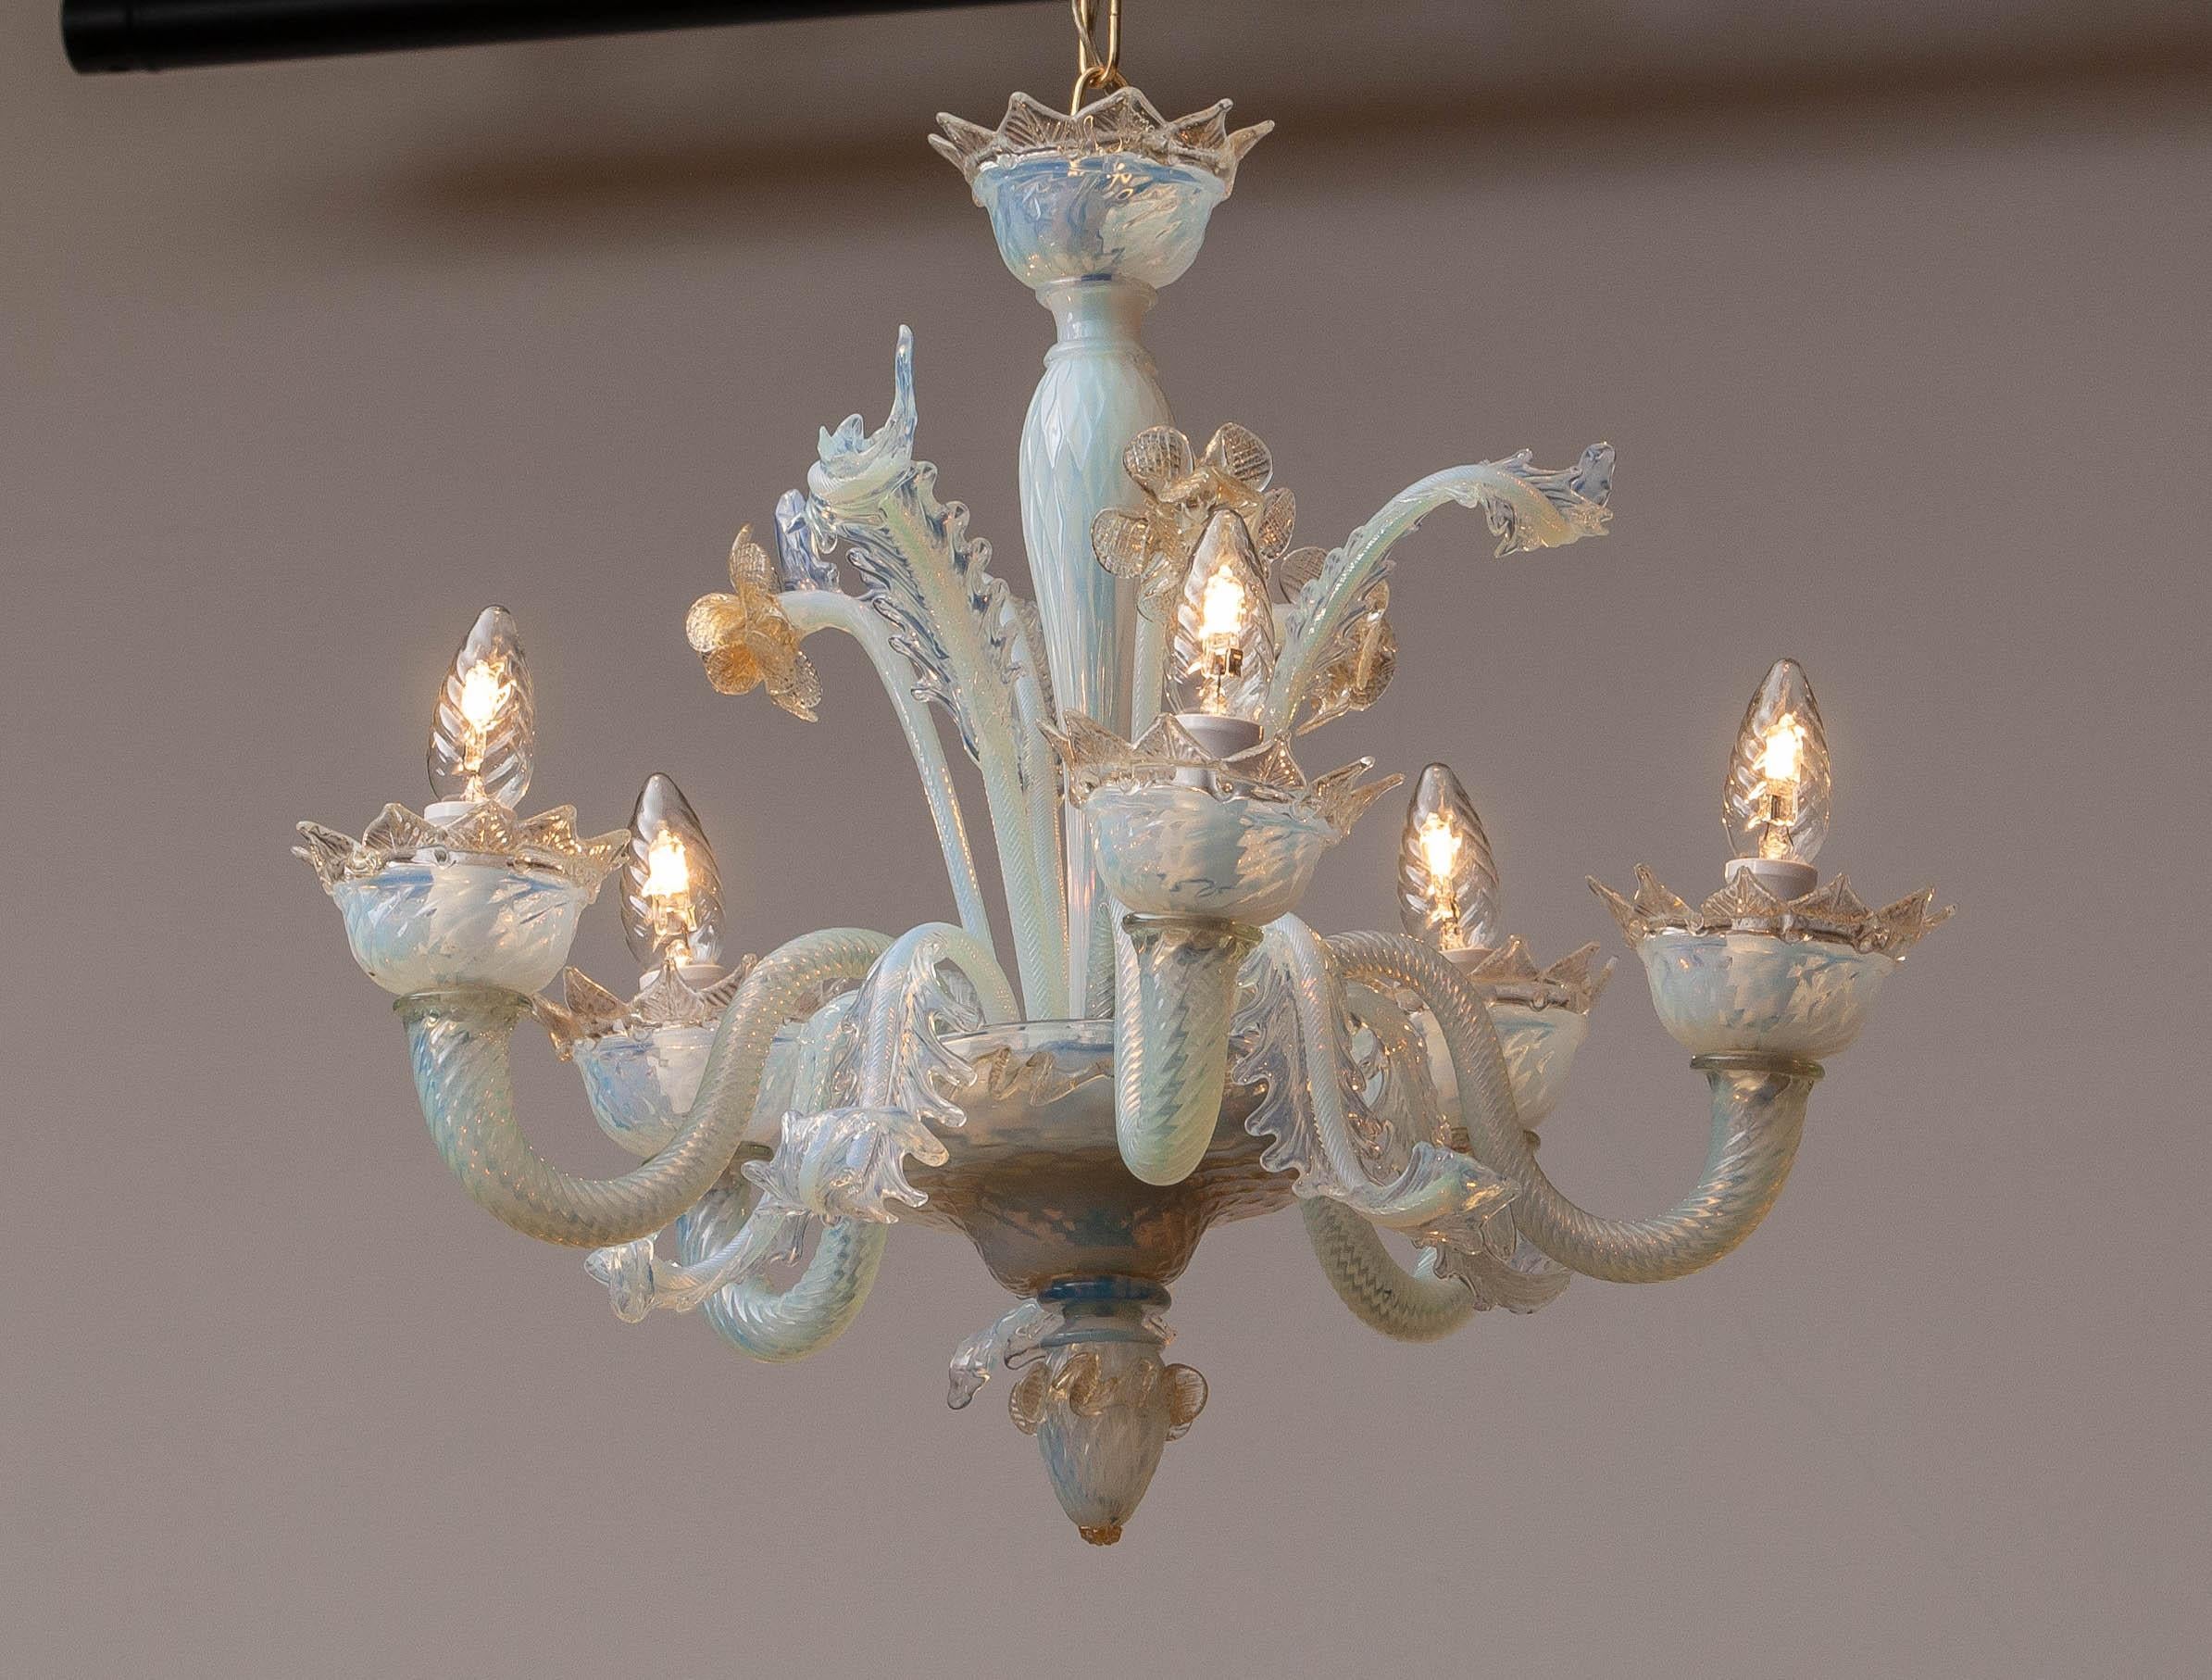 Absolutely beautiful Venetian Murano chandelier in a very rare light blue translucent opaline glass combined with gold which comes with five arms.
Designed by Barovier & Toso 